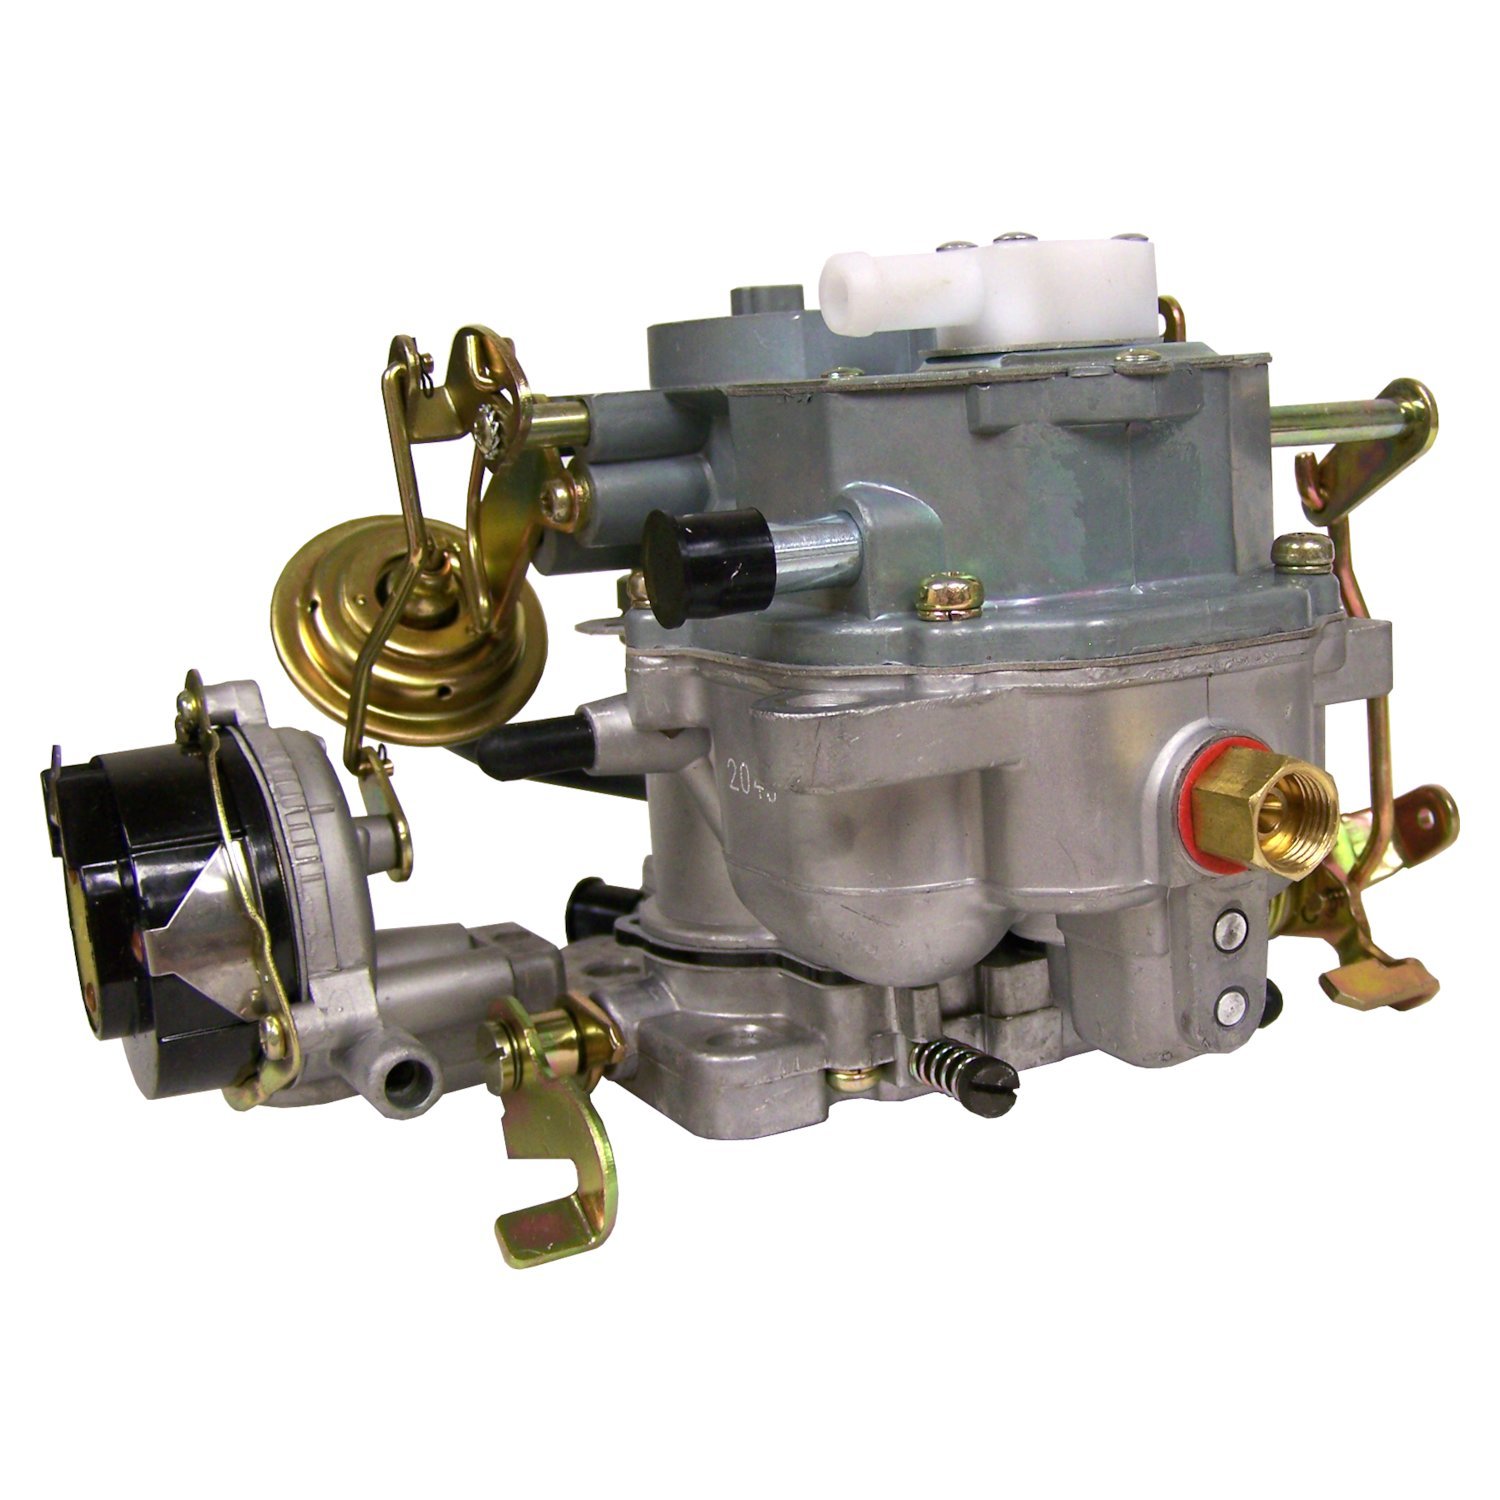 Carburetor; Remanufactured;w/o ElectronicFeedbackMotor;ReplacesTagNumbers8284/8304/8308/8309/8312/8335/8336/8337/8349/8351/8355/8363/8392;